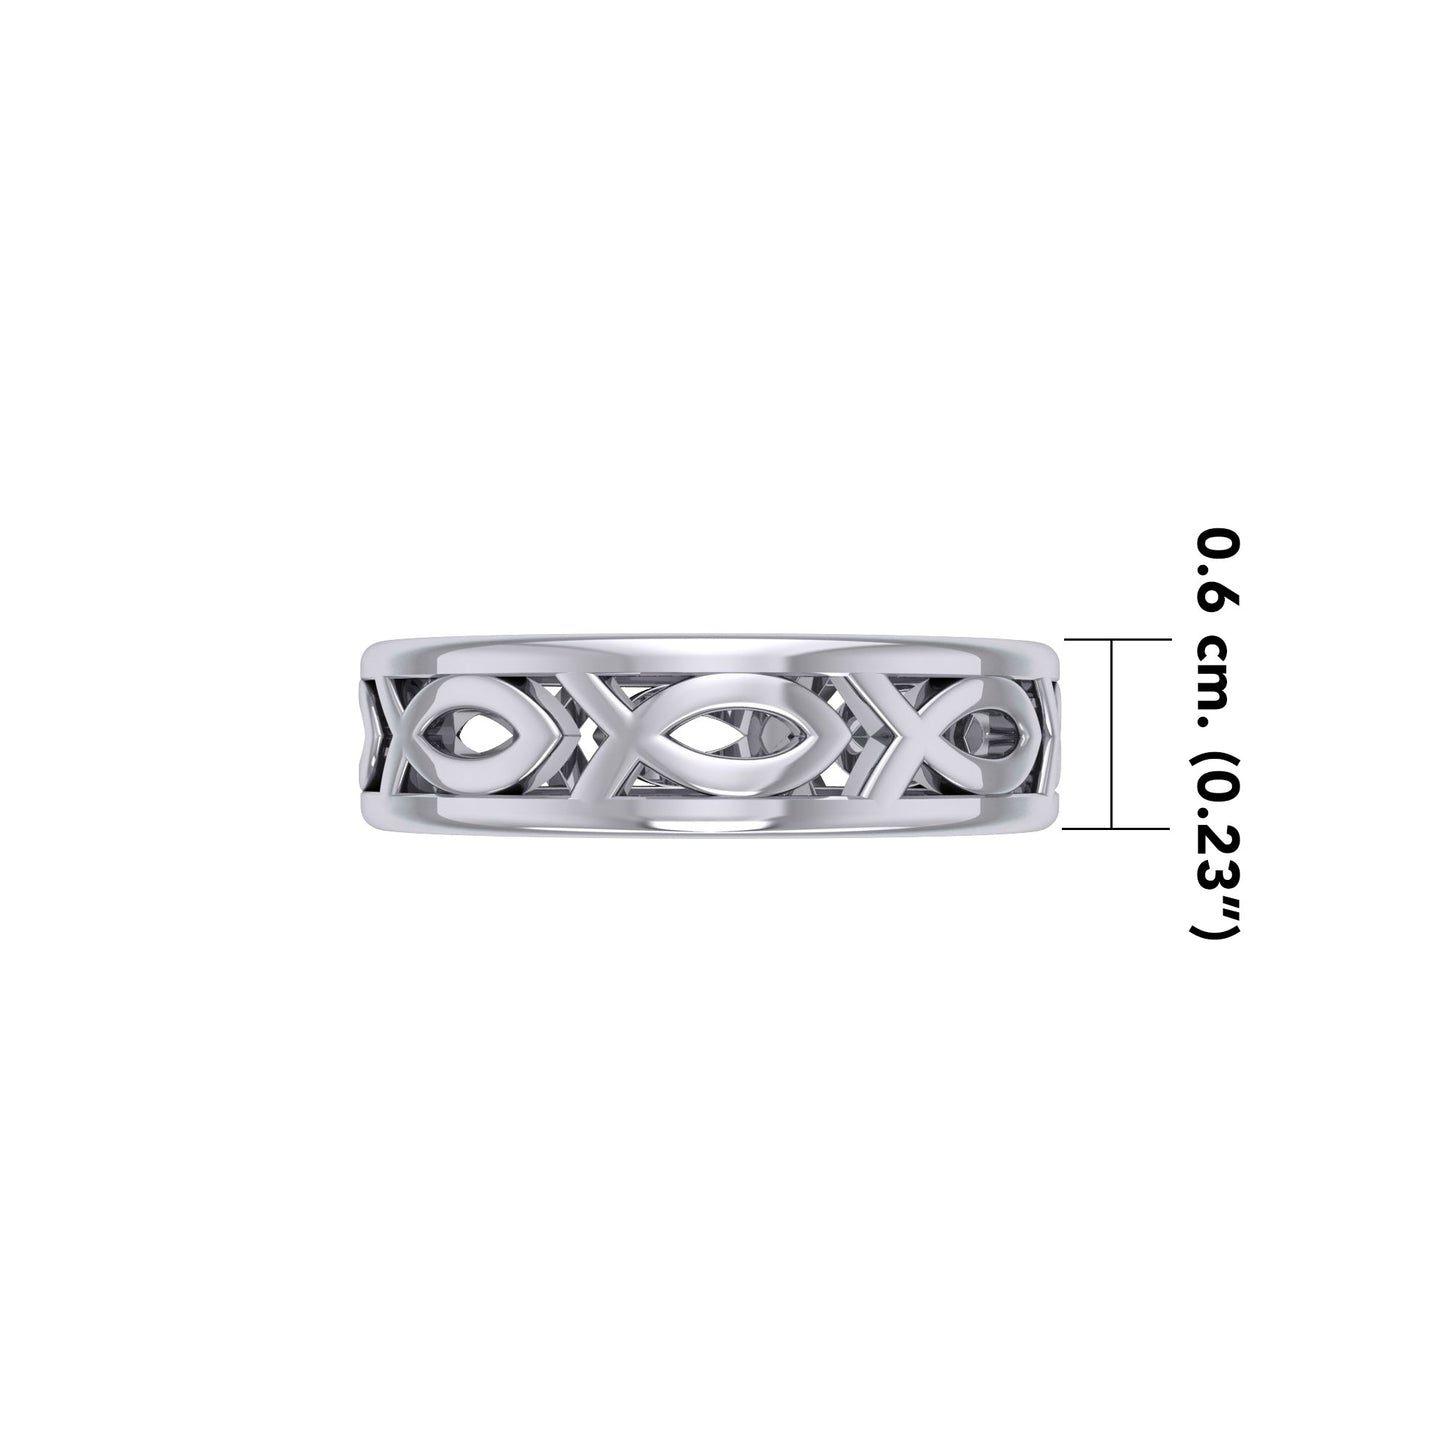 Silver Ichthus Jesus Christian Fish Ring TR1036